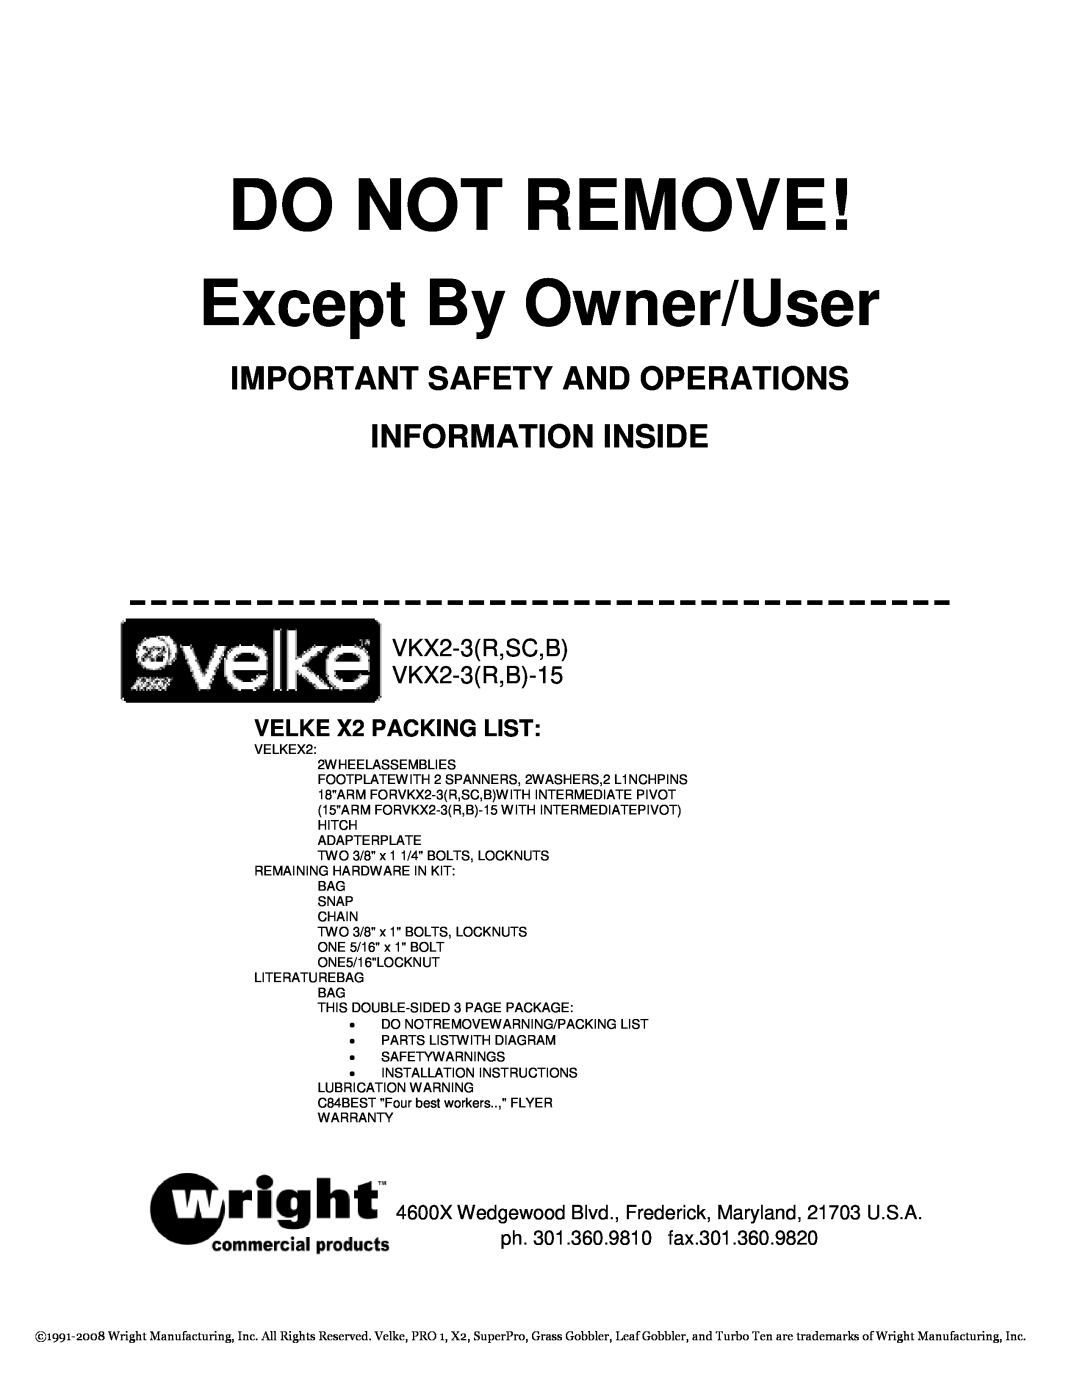 Wright Manufacturing VKX2-3(R installation instructions Do Not Remove, Except By Owner/User, Information Inside 